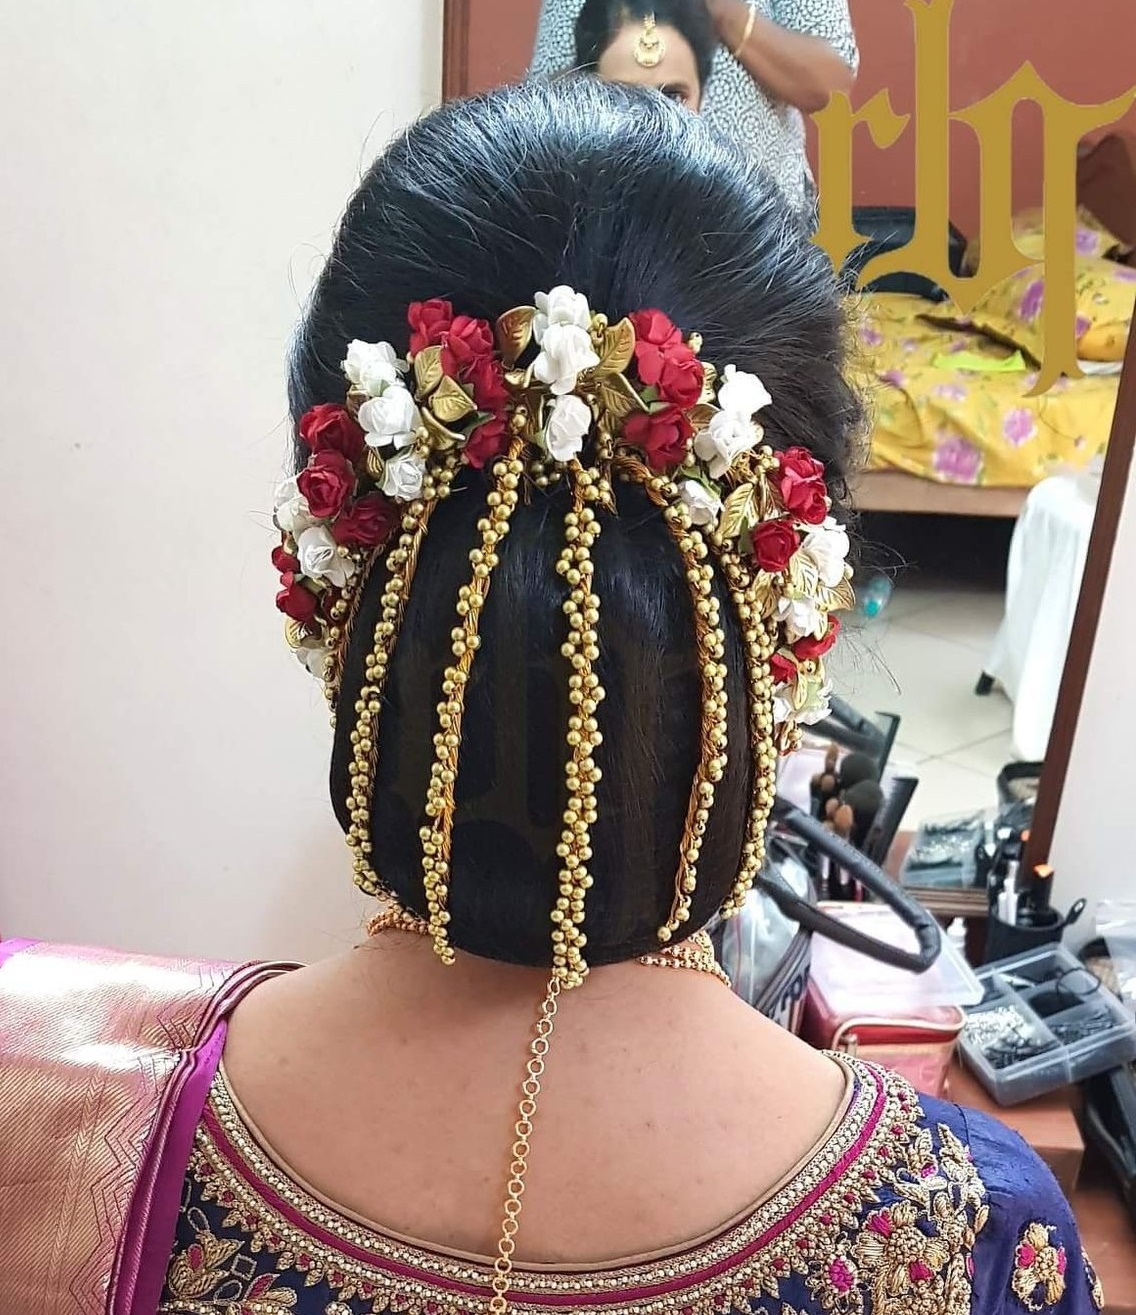 Can you show me some best Indian bridal hairstyles? - Quora